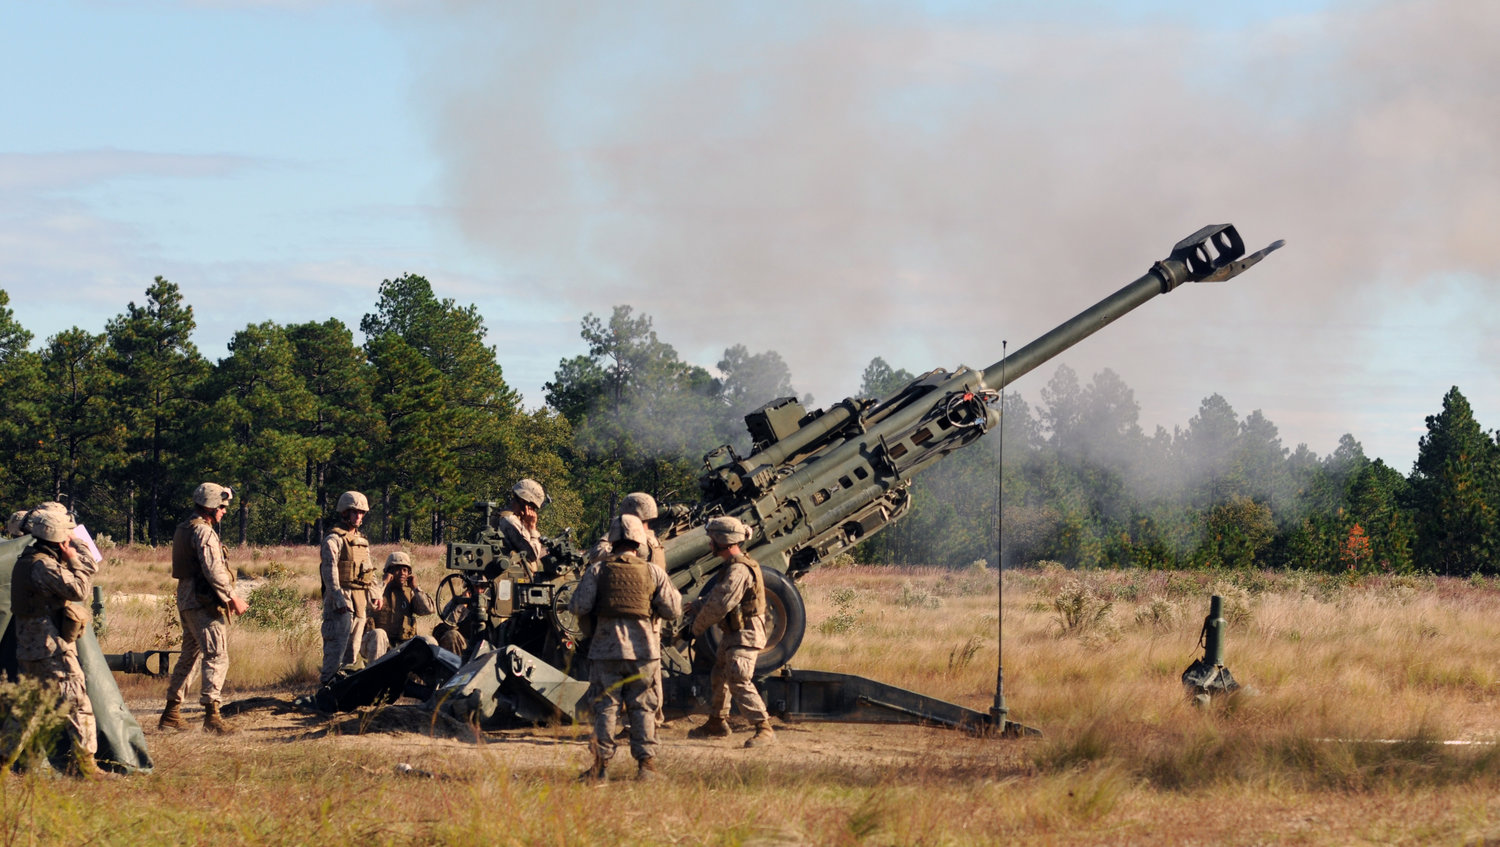 Marines from the 1st Battalion, 10th Marine Regiment shoot 155mm ammunition from a Howitzer on Oct. 14, 2011, during training at Fort Bragg. The Camp Lejeune-based Marines are back at Fort Bragg to conduct their semi-annual field artillery section certifications, command-post exercise and live-fire training as part of Operation Rolling Thunder.